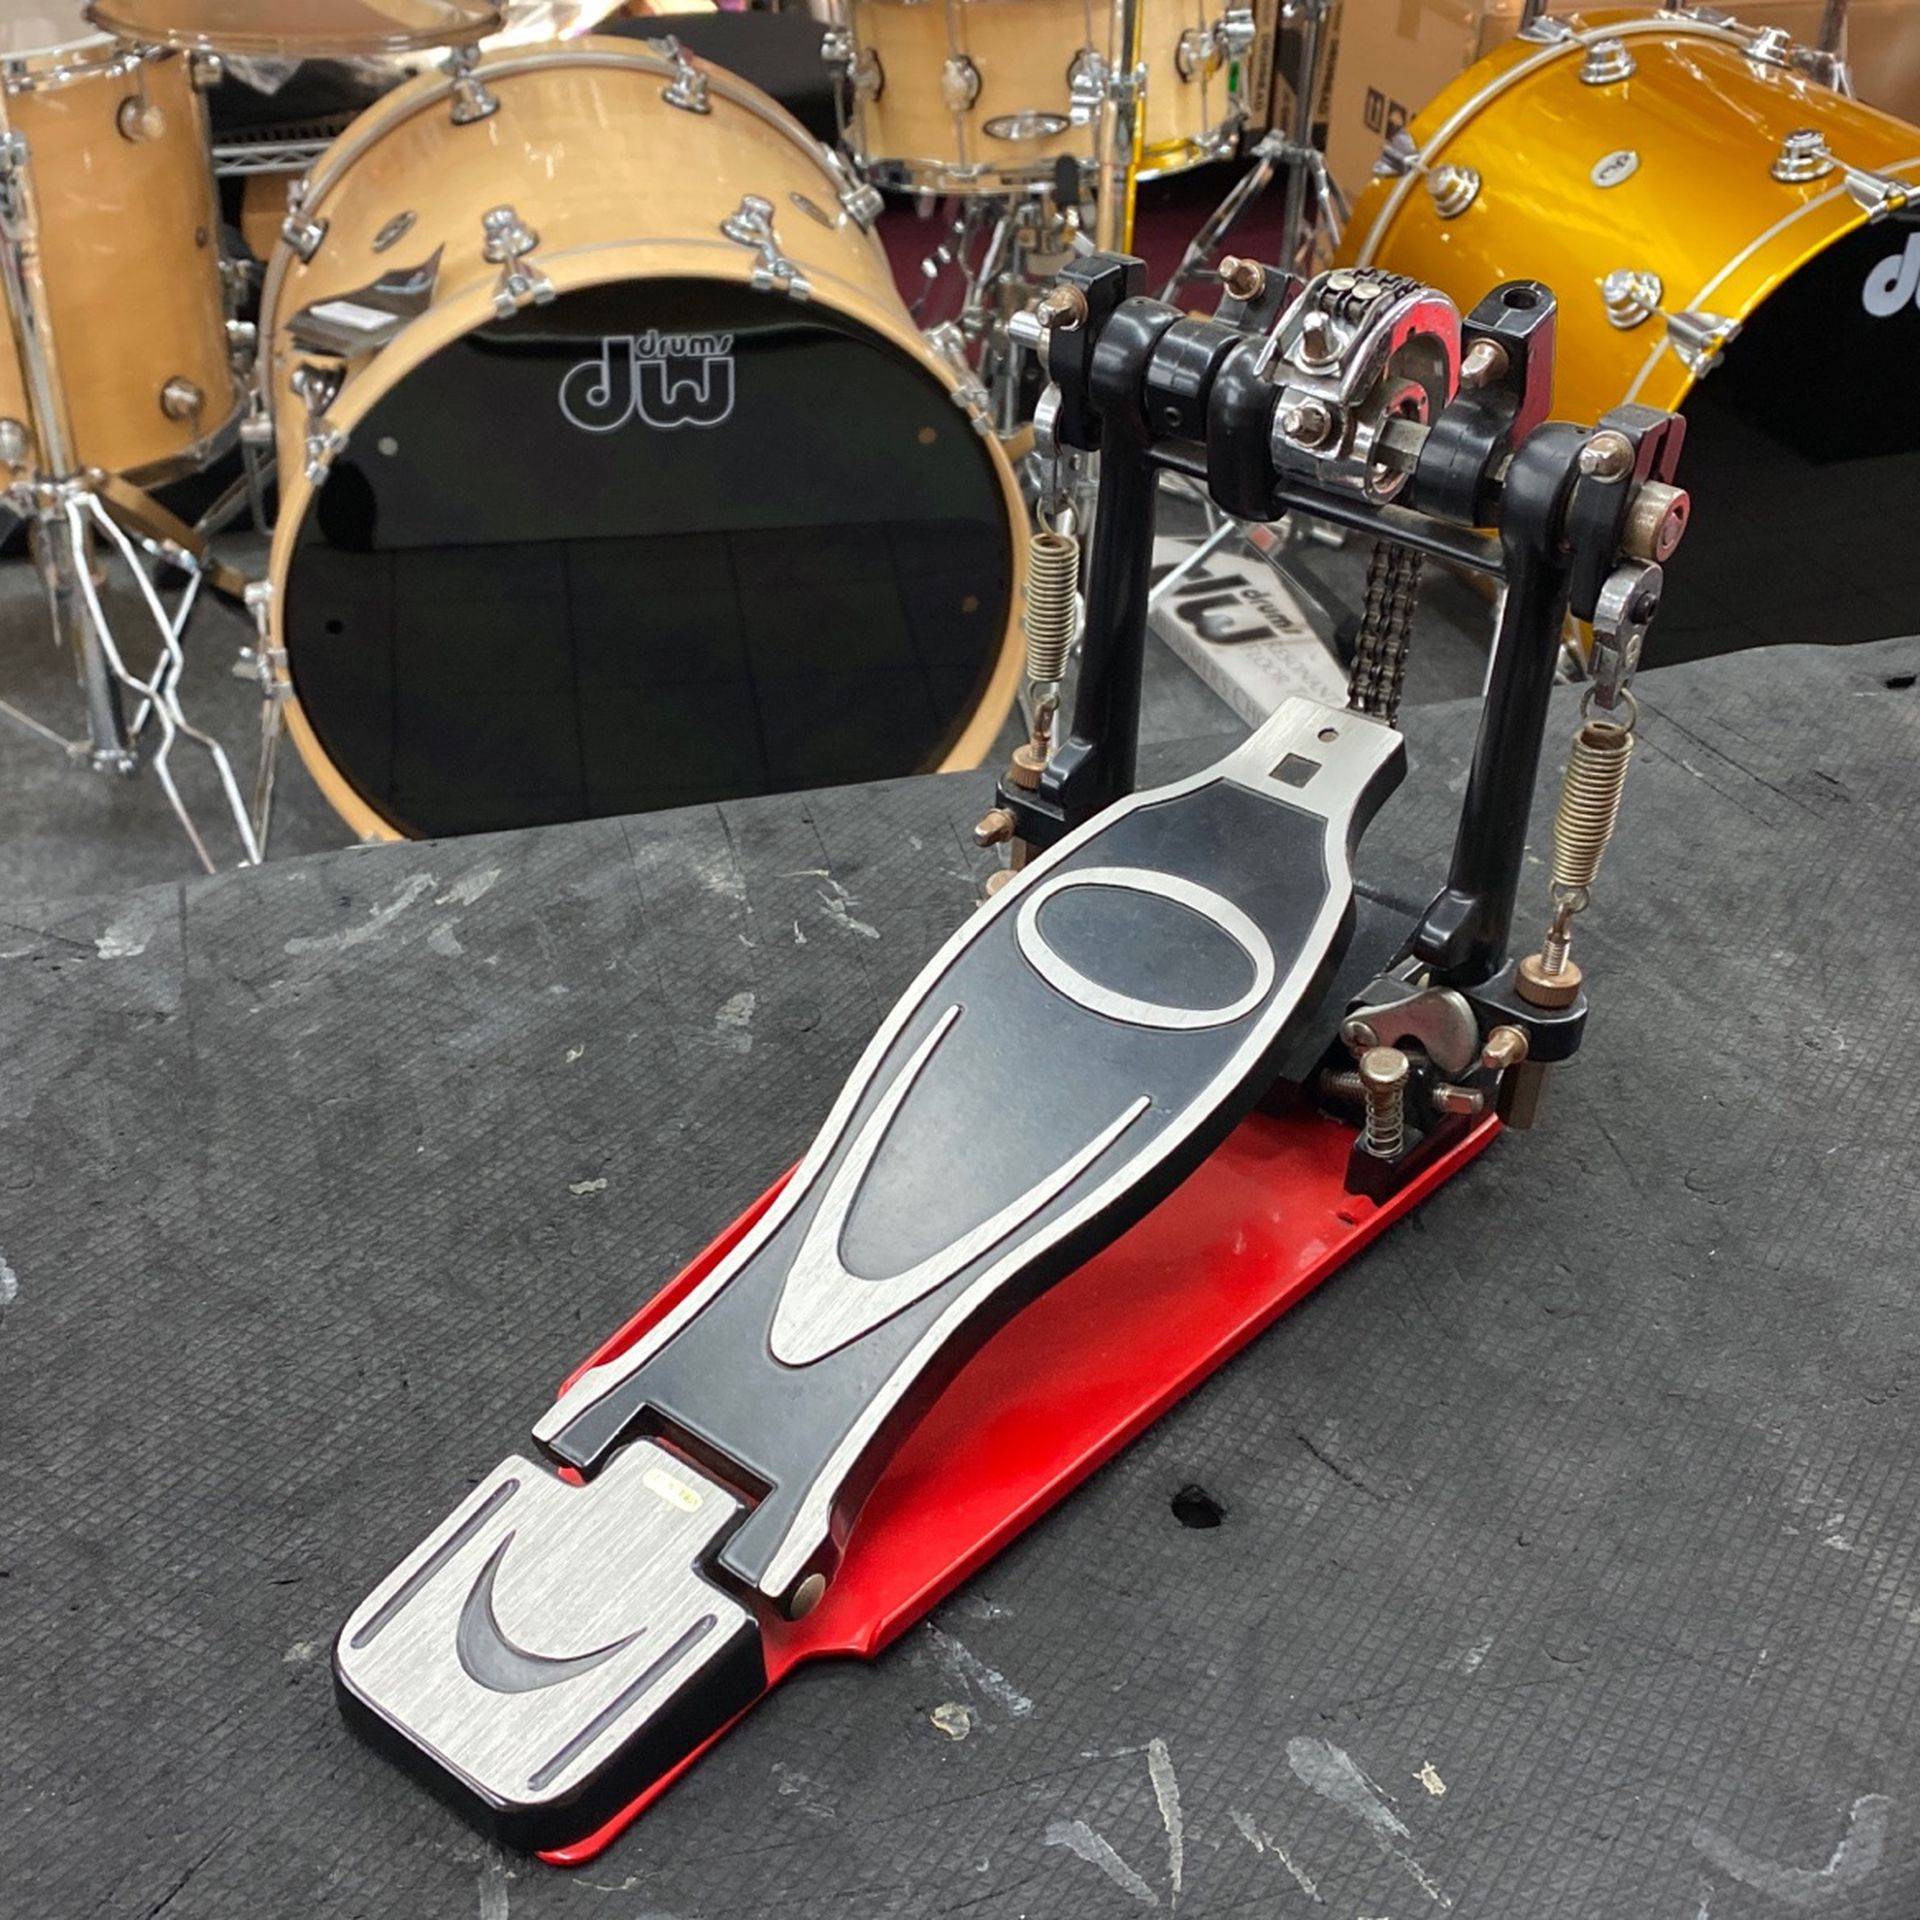 BASS PEDALS FOR DRUM SET